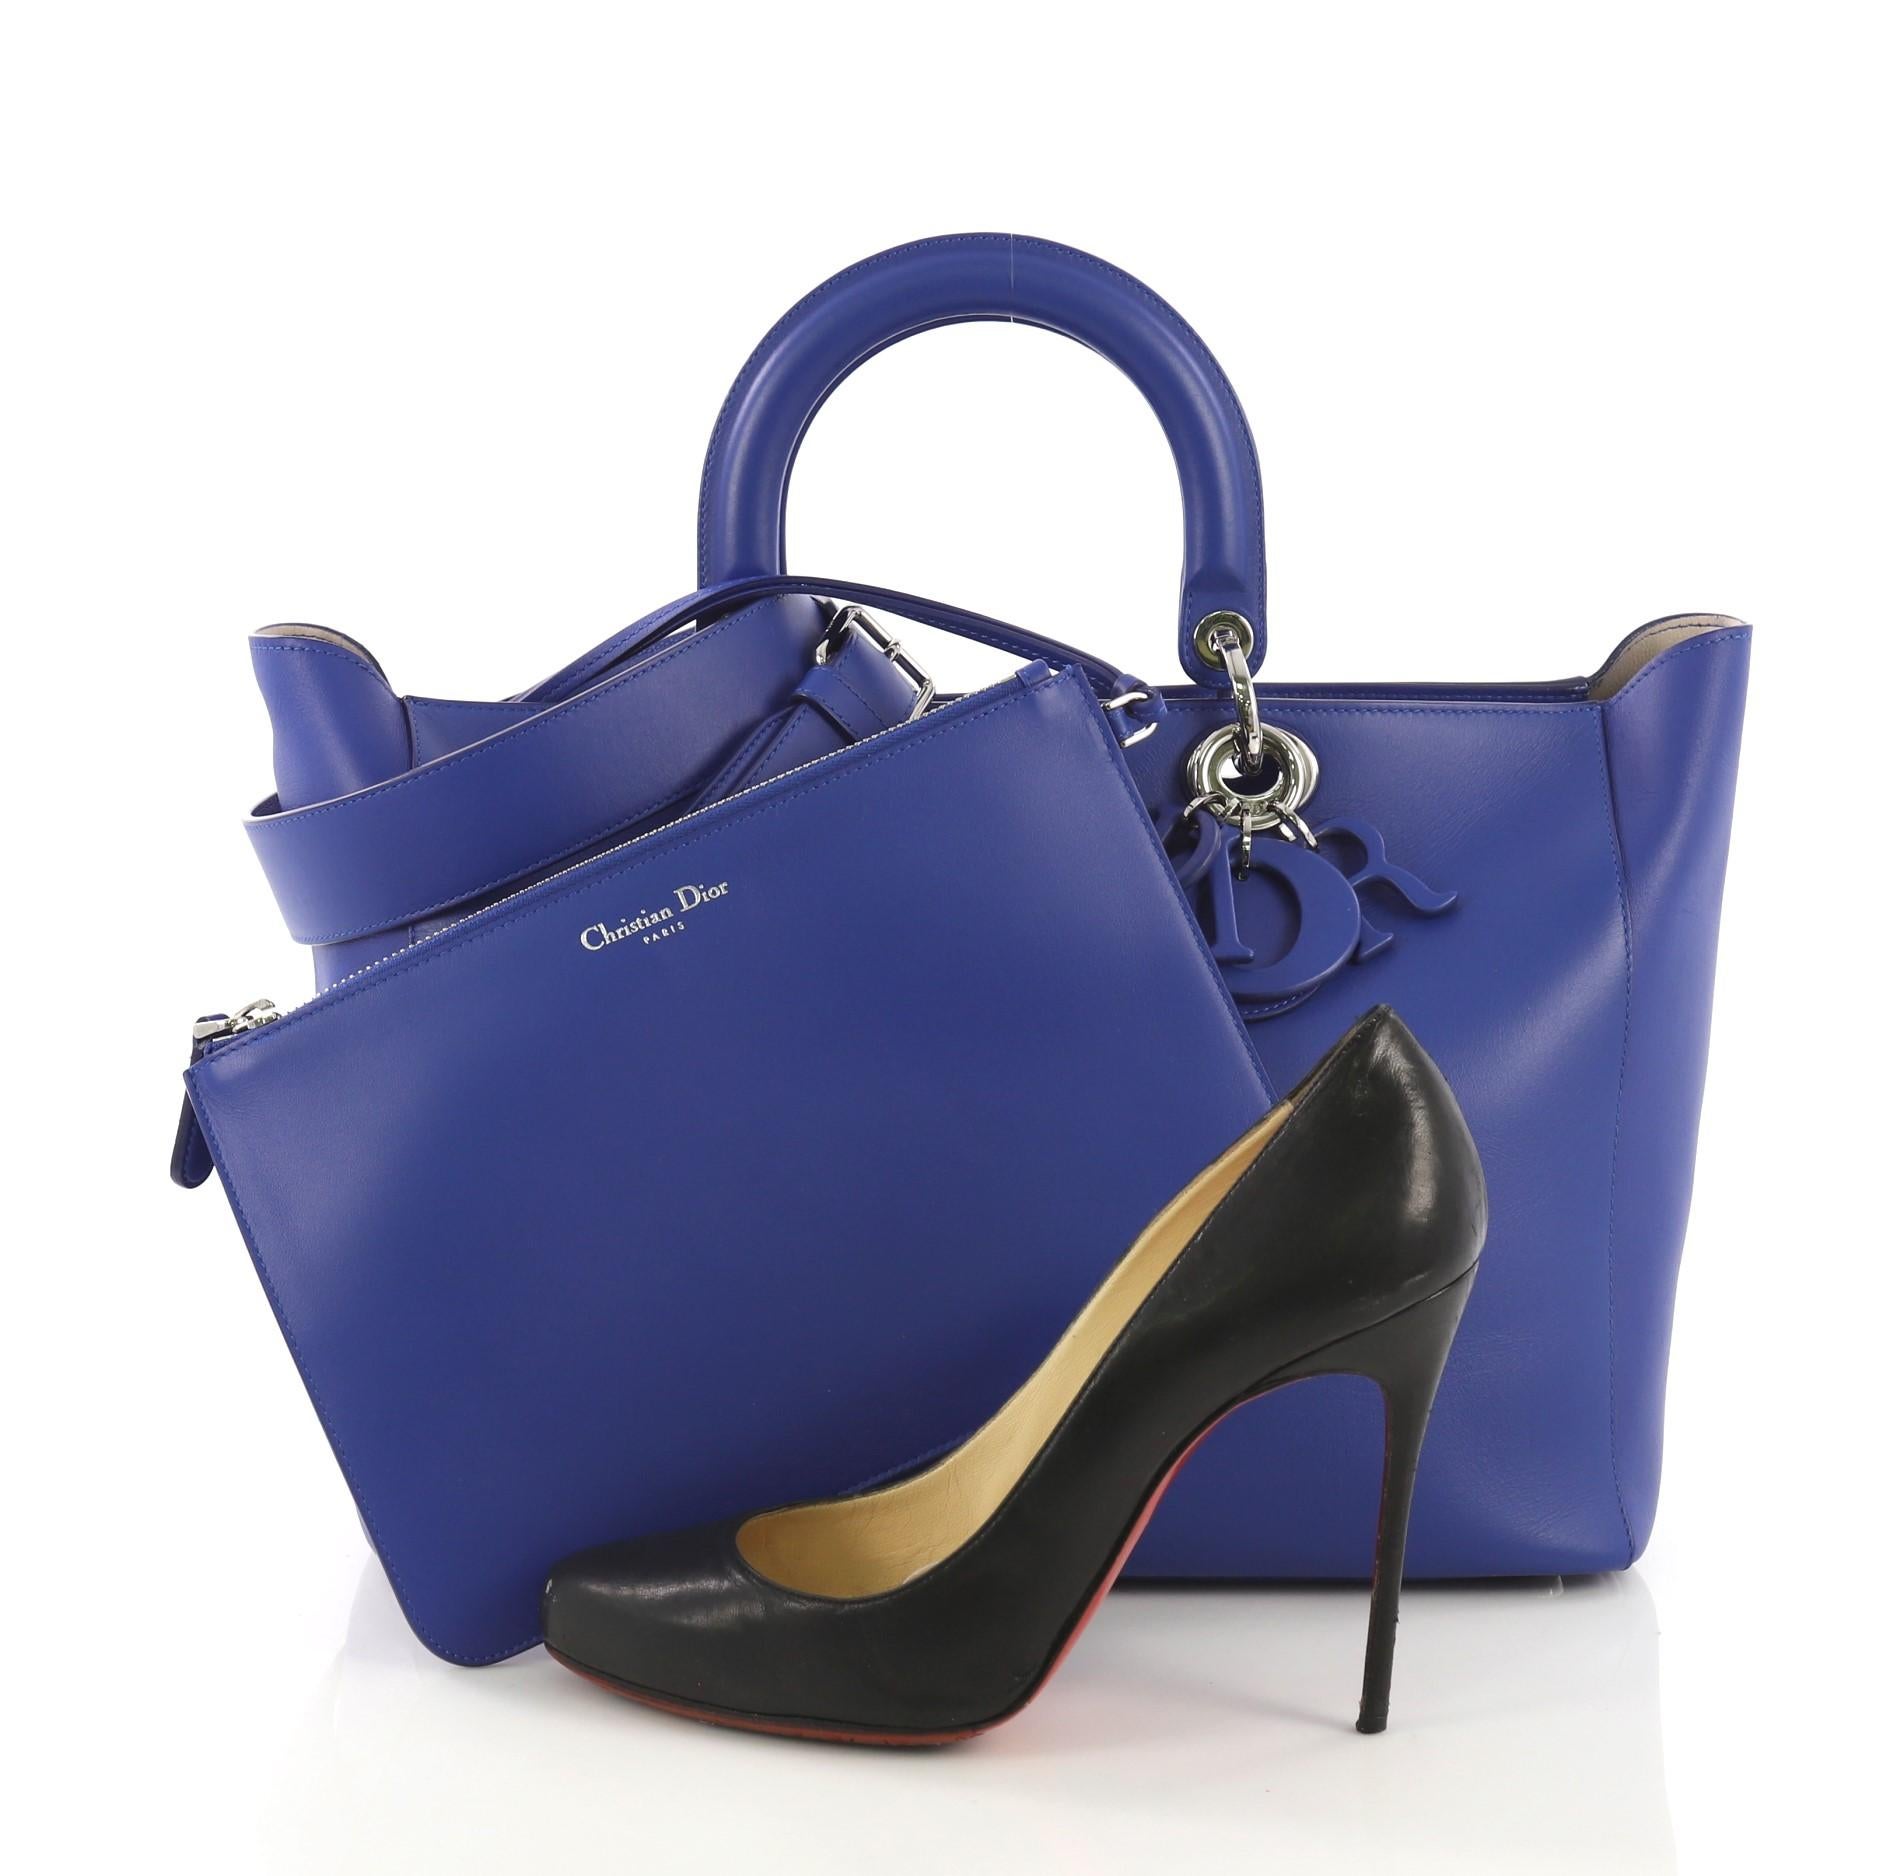 This Christian Dior Diorissimo Zip Tote Smooth Calfskin Large, crafted from blue smooth calfskin leather, features smooth short dual handles with Dior charms, protective base studs and silver-tone hardware. It zip closure opens to a beige leather